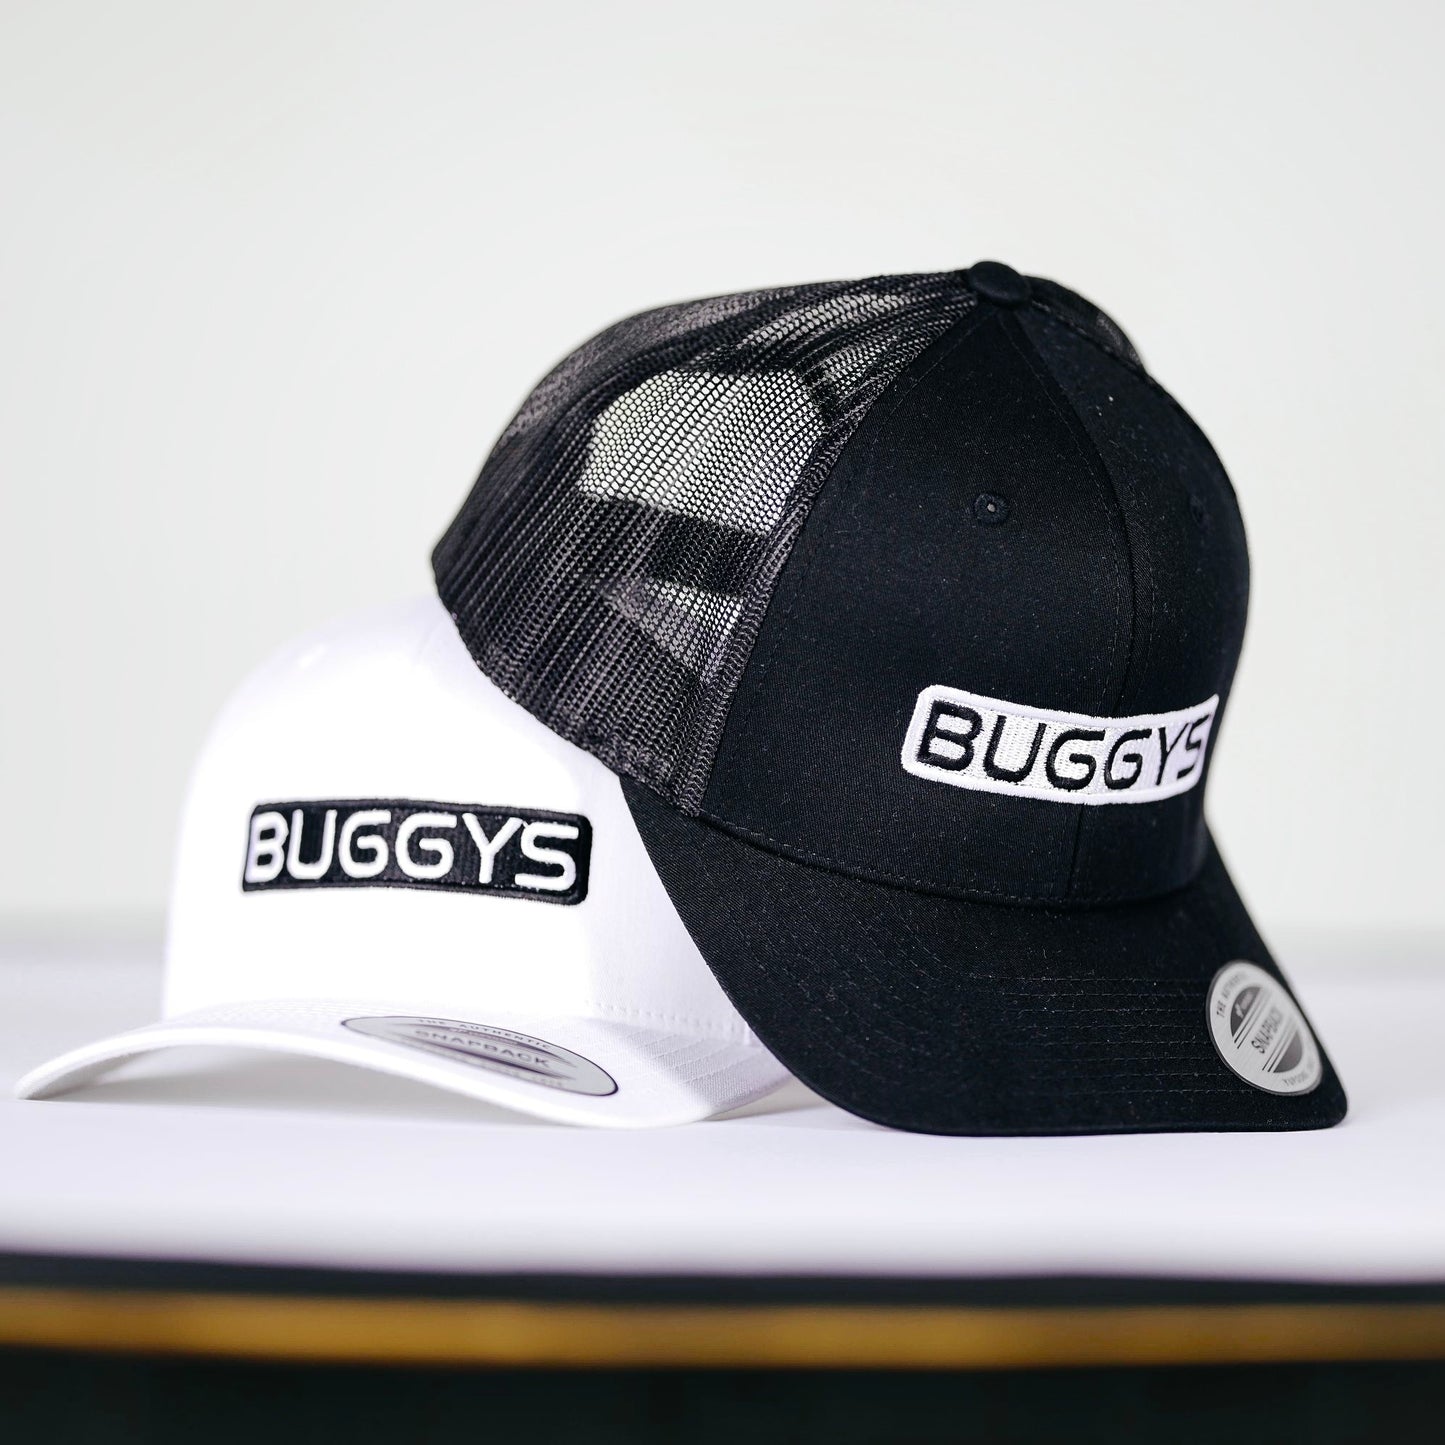 Official Buggys Competition Gamer Snapback Cap